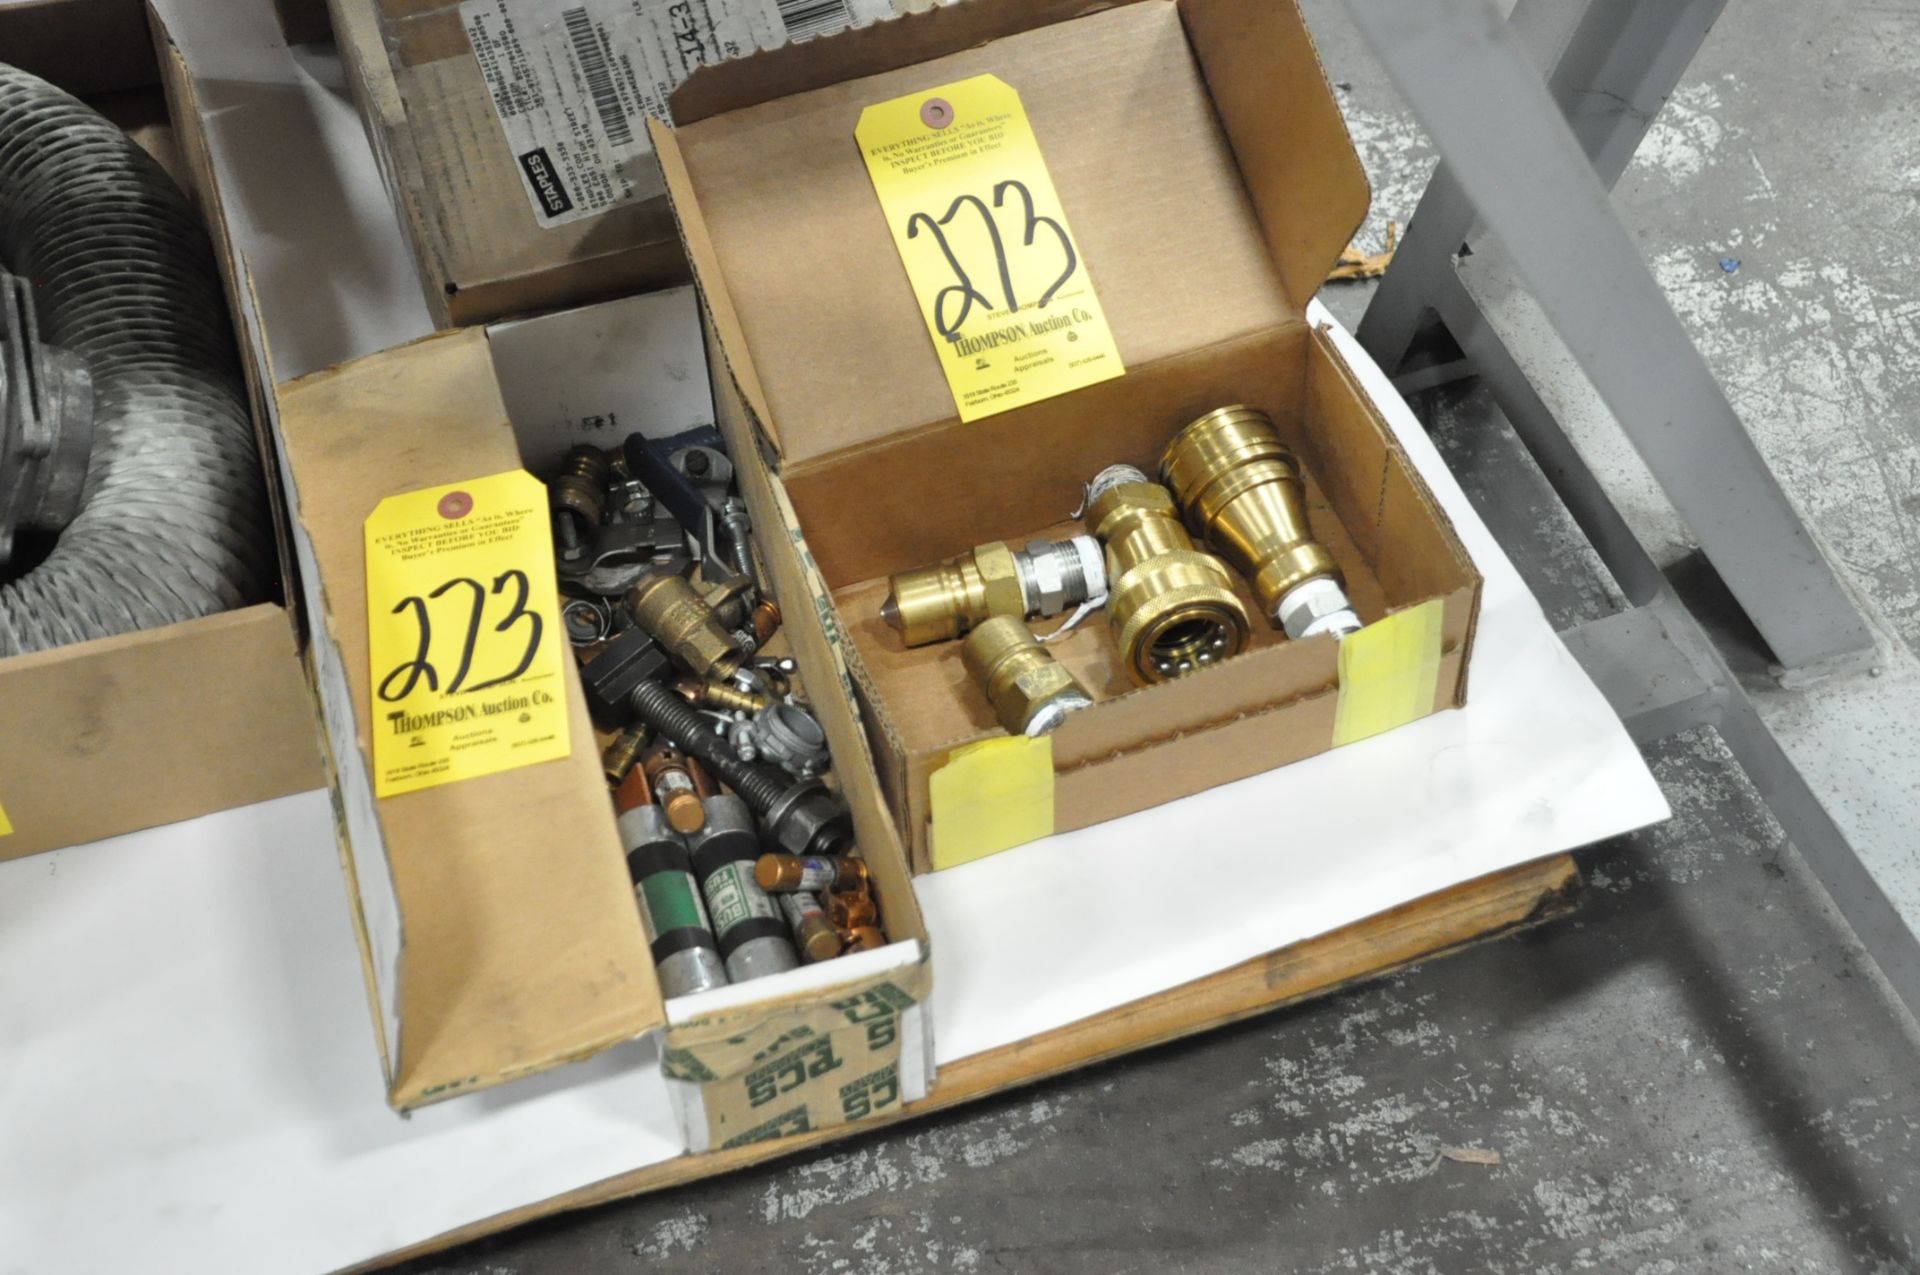 Lot-Hydraulic Hose Fittings in (5) Boxes Under (1) Bench - Image 3 of 3